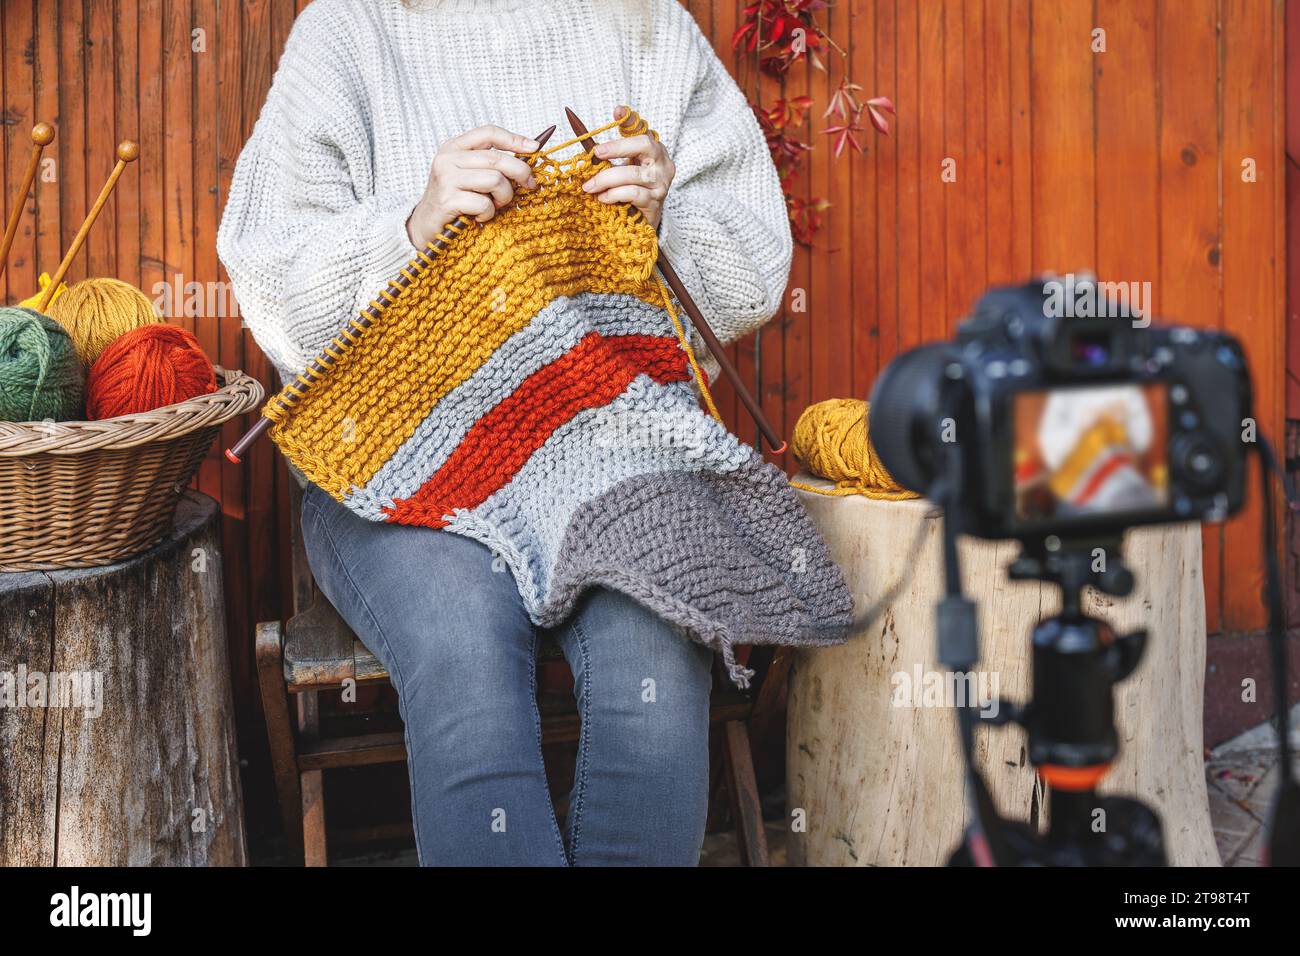 Woman vlogging her knitting technique and skill. Creative female vlogger live streaming on social media Stock Photo